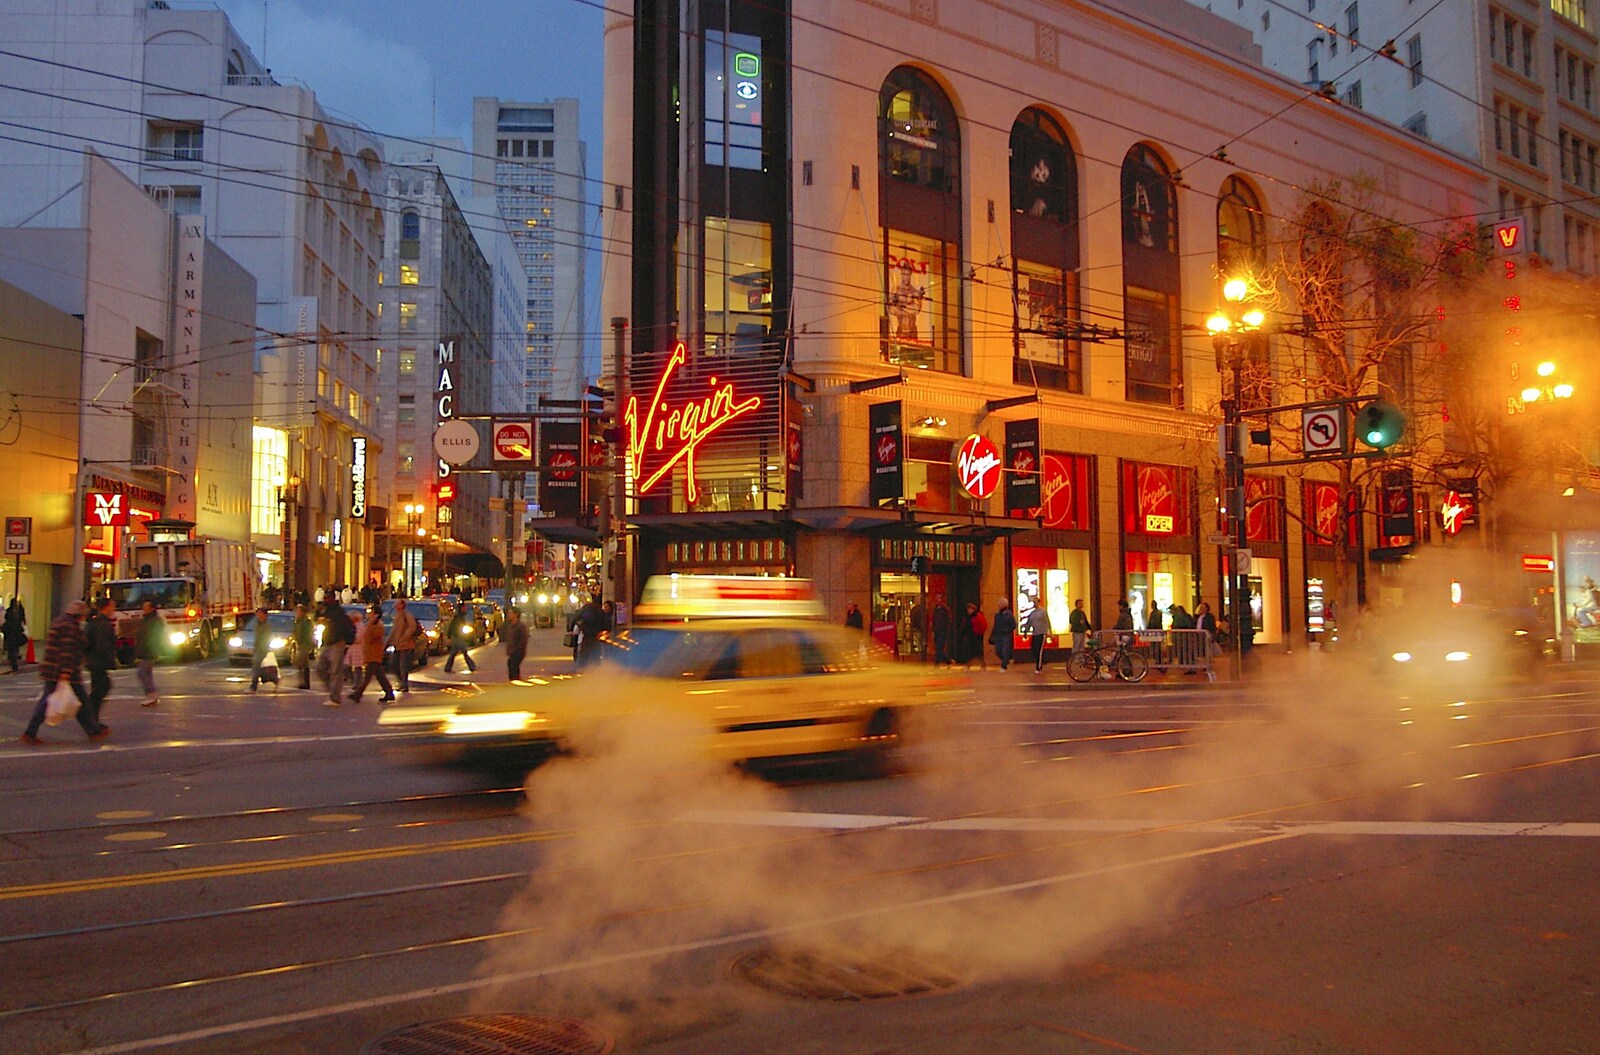 Market Street has a New York steam thing going on from The Golden Gate Bridge, San Francisco, California, US - 11th March 2006